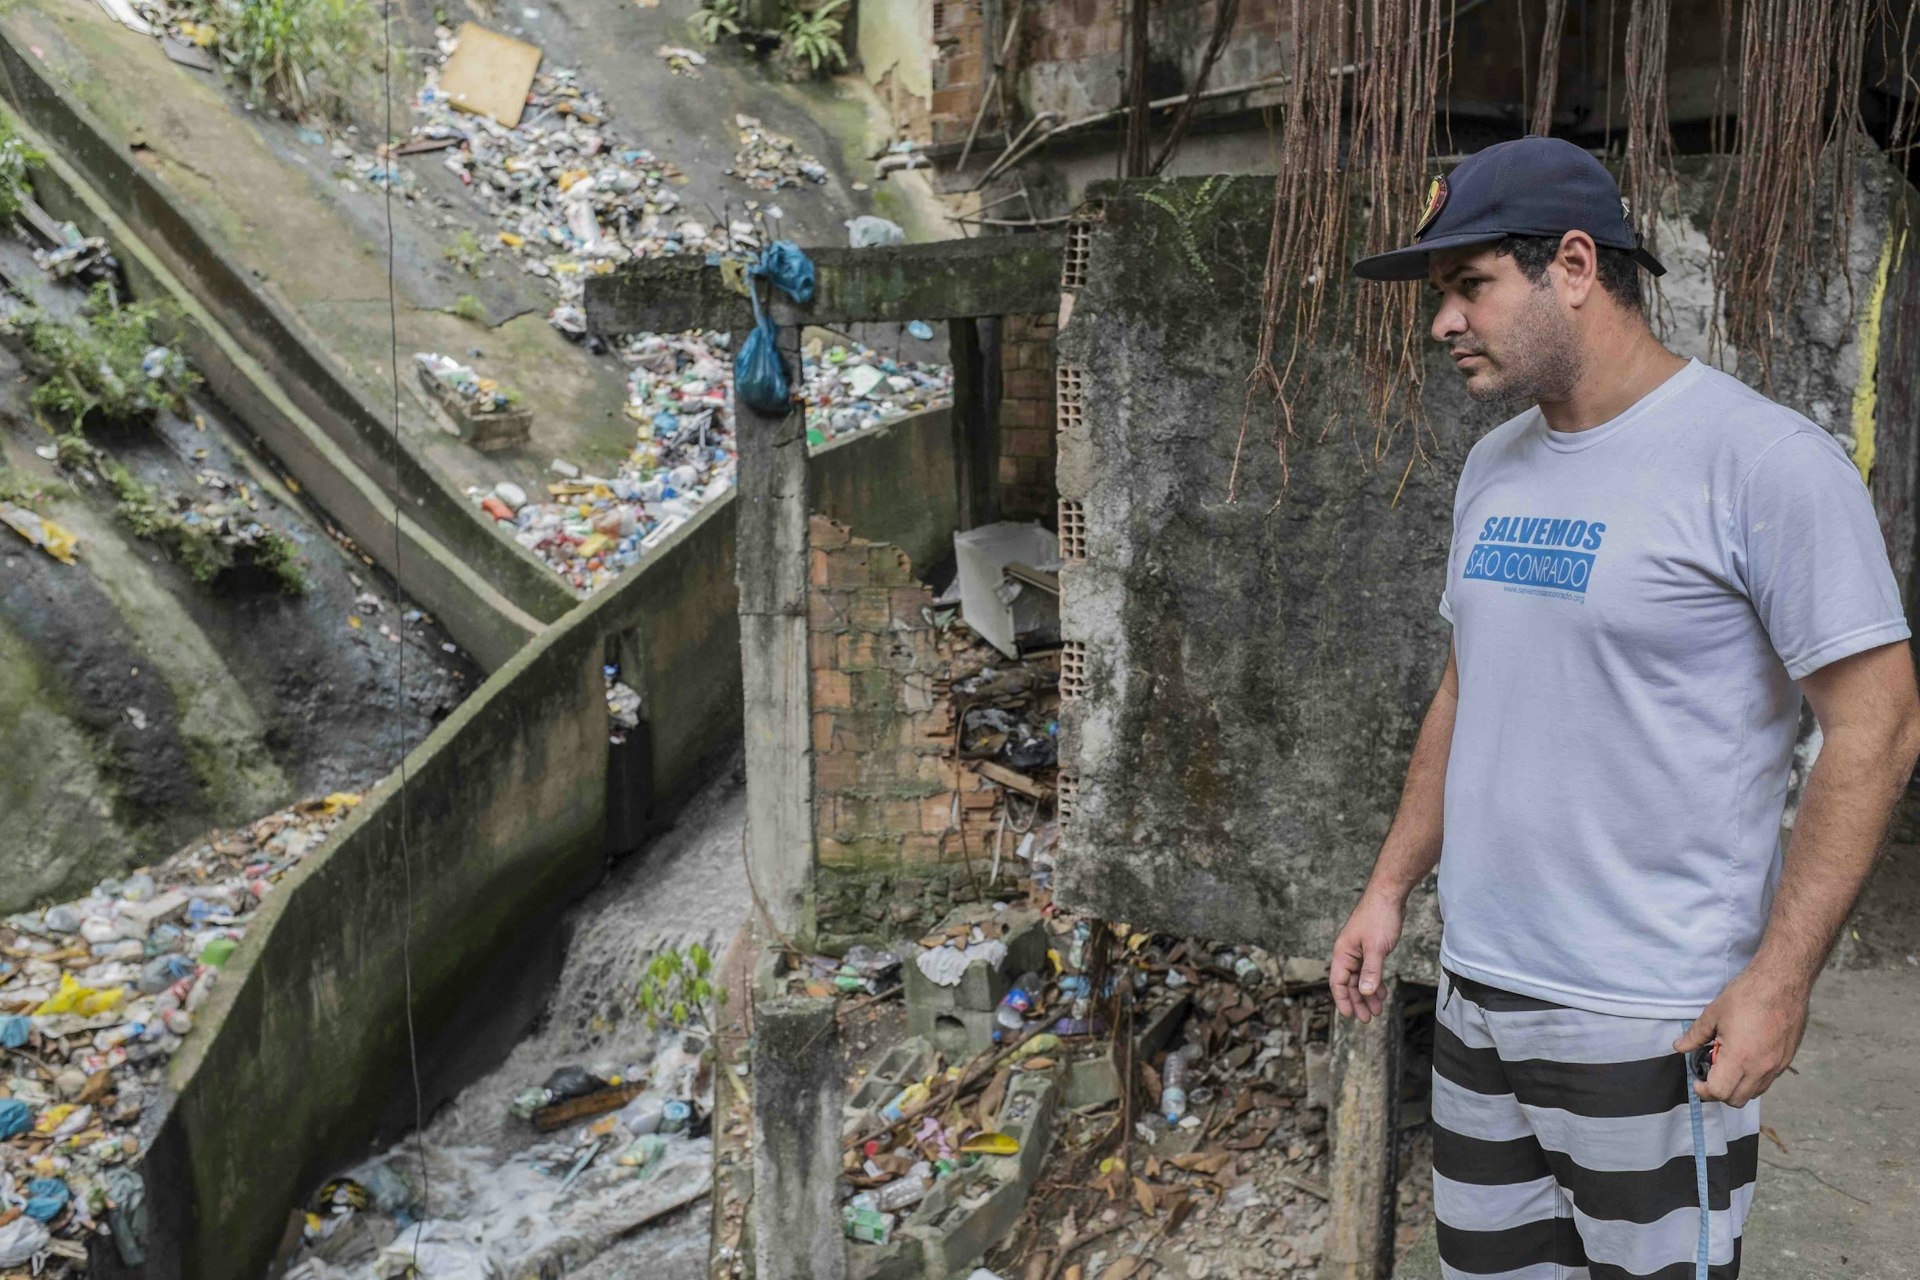 Marcello Farias in front of a polluted drain in Lajão, Rocinha.